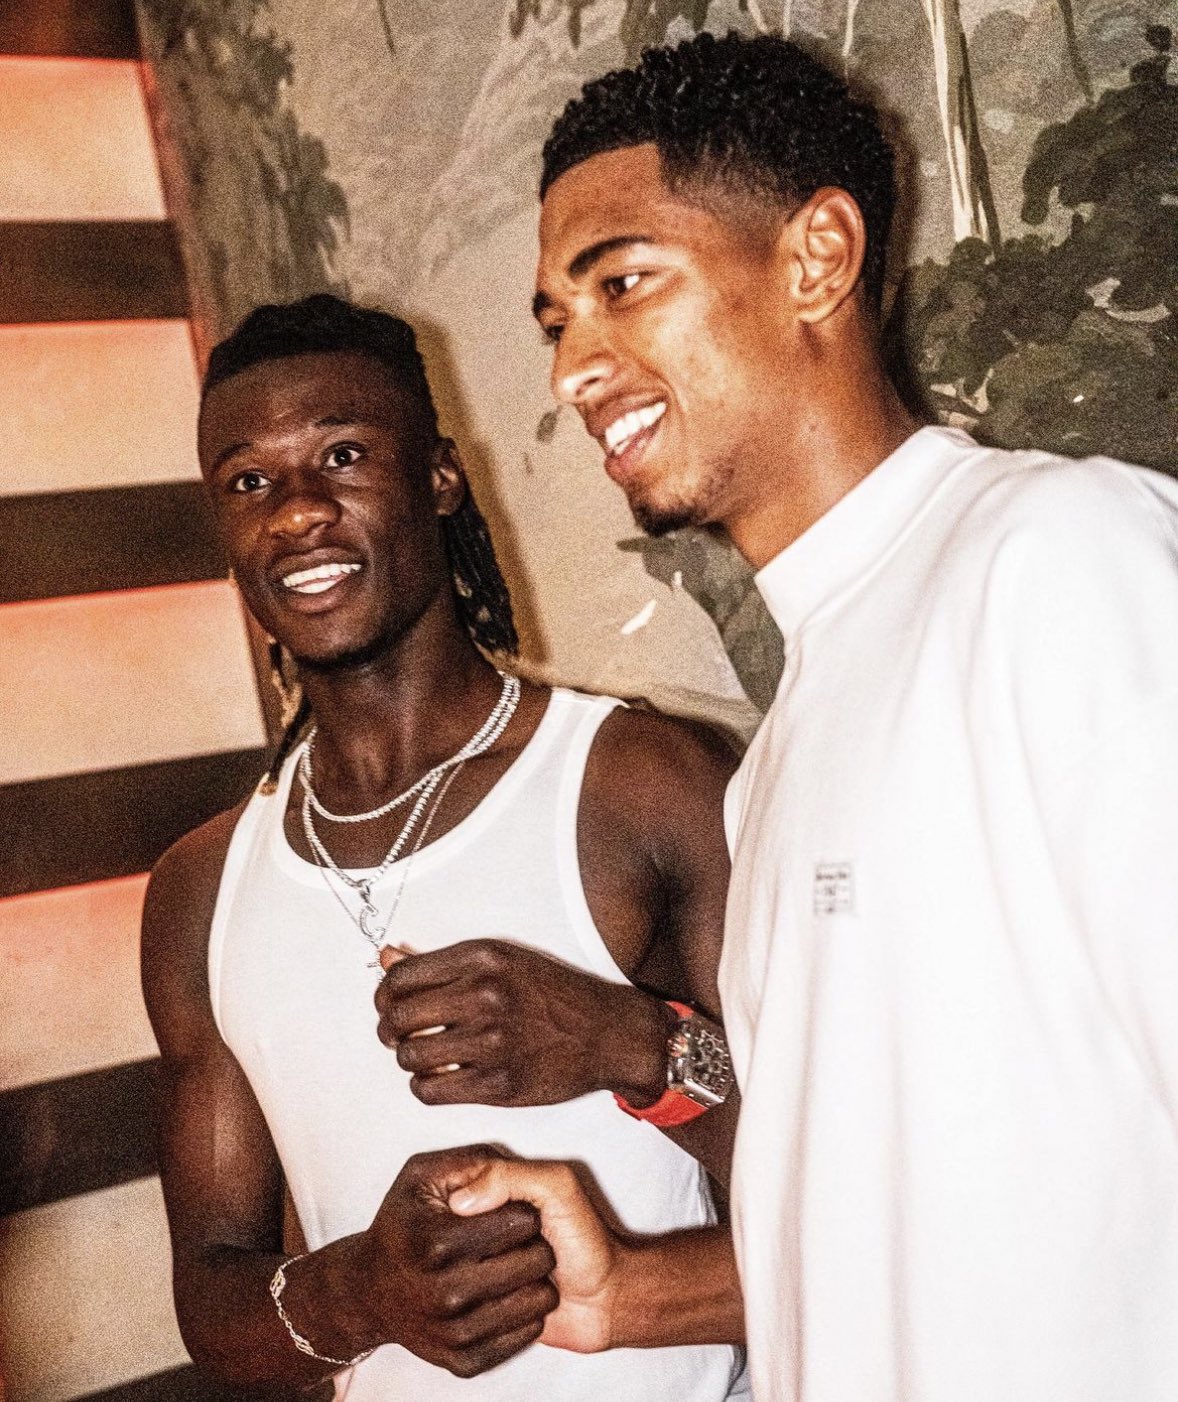 Jude Bellingham led his Real Madrid teammates to party at a luxury beach club in San Tropez, after he and Vinicius were named at the Balon d'Or awards ceremony